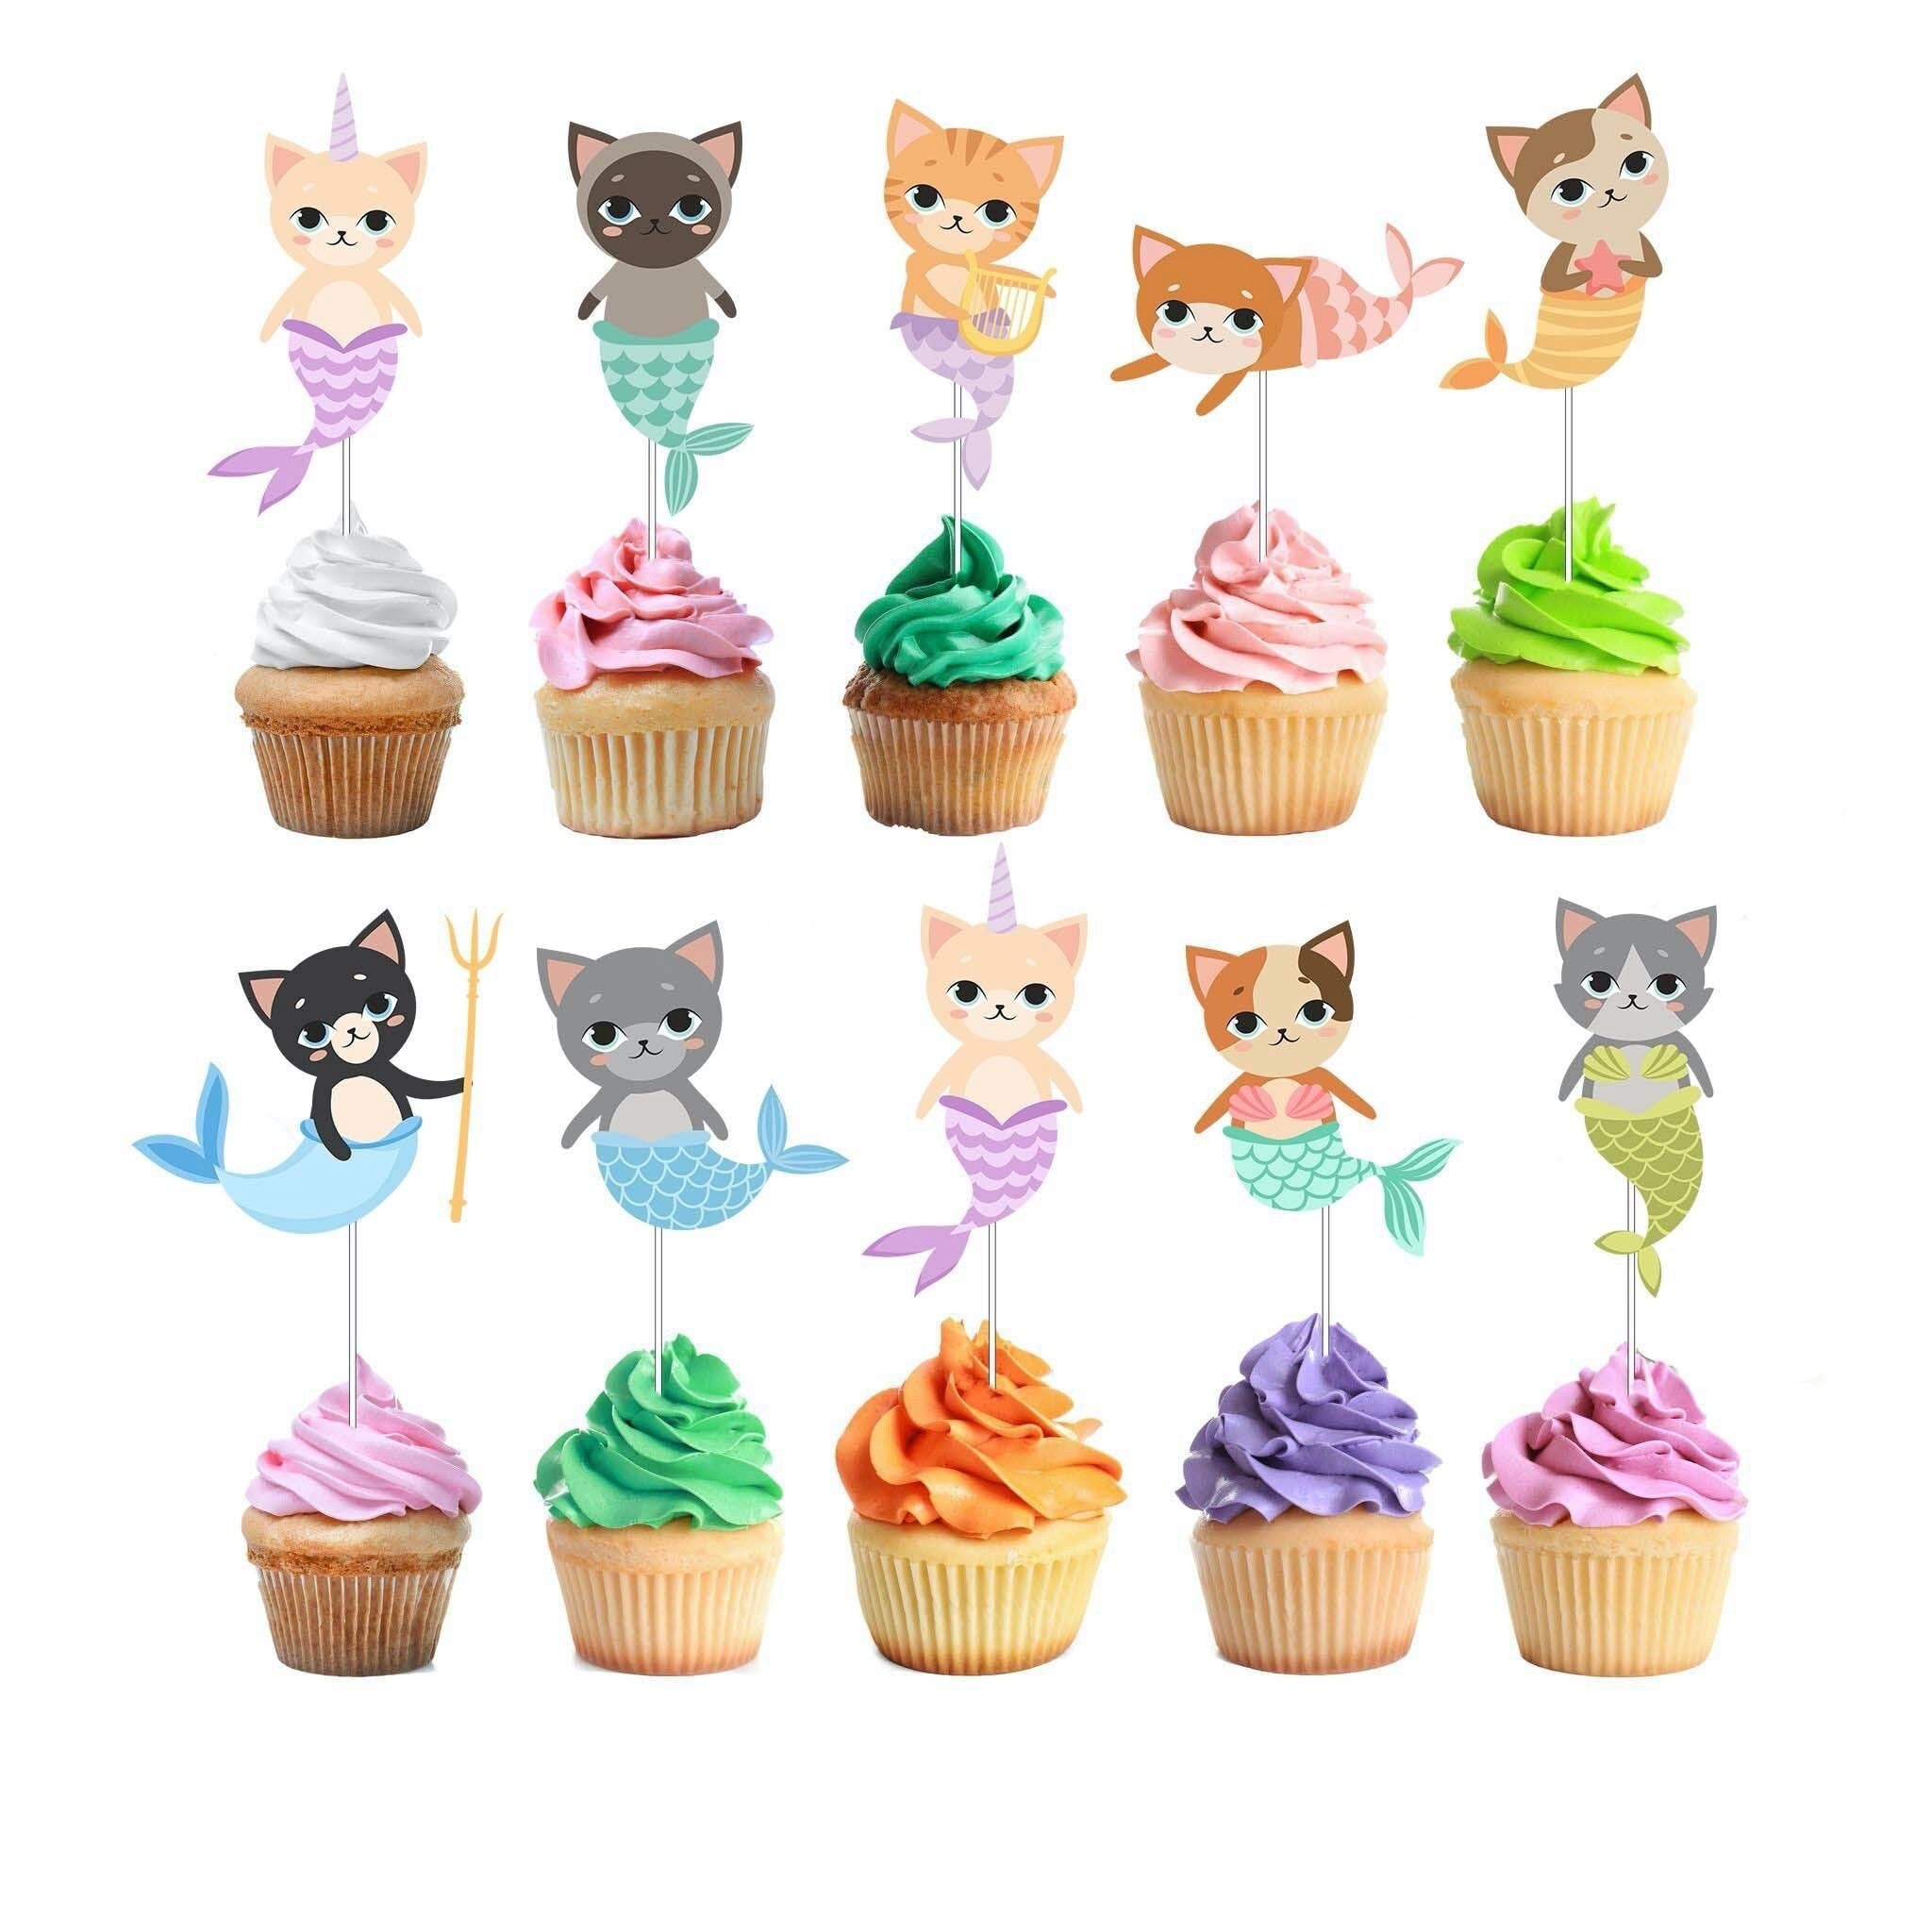 Meowmaid Mercat Cupcake Toppers - Purr-fect Under-the-Sea Charm for Your Sweets!